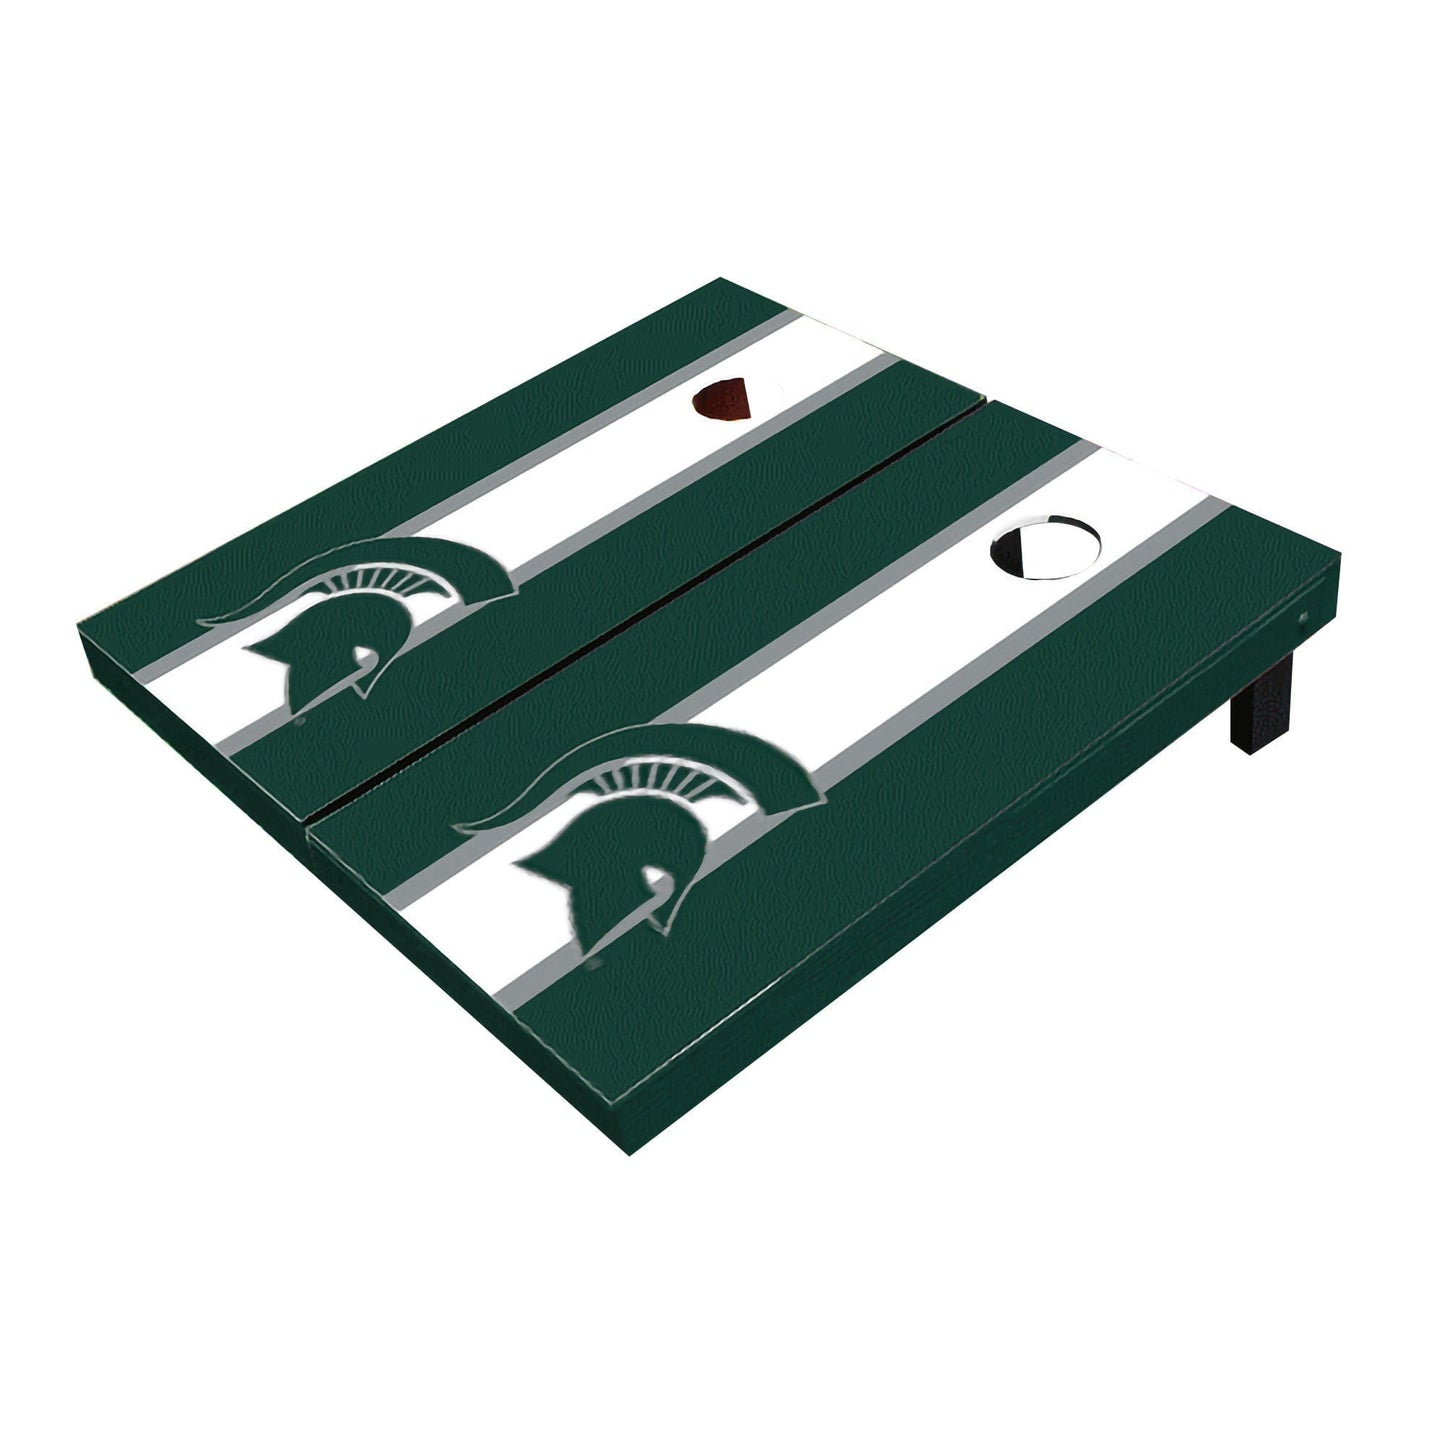 Michigan State Spartans White And Hunter Matching Long Stripe All-Weather Cornhole Boards